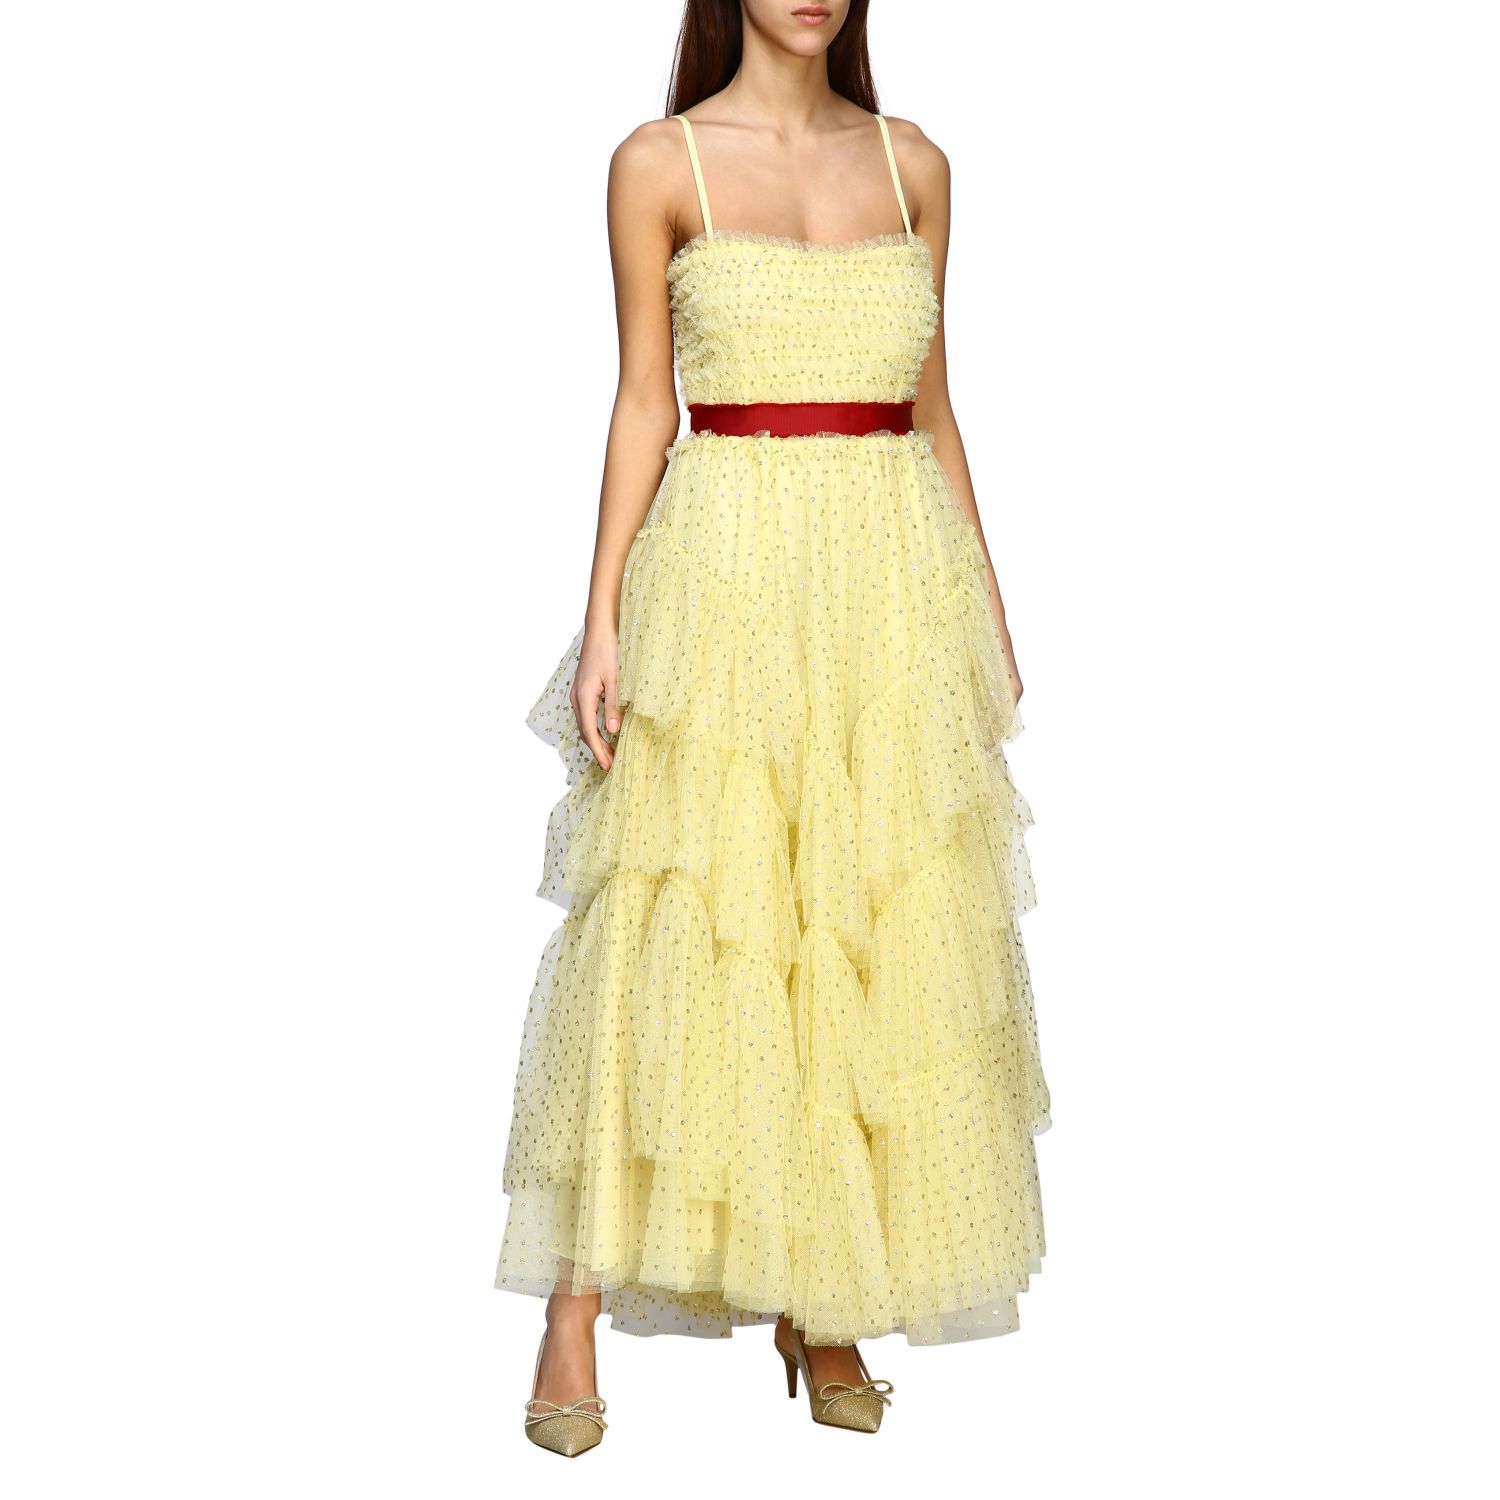 RED VALENTINO: Long dress in tulle with polka dots - Yellow | Red Valentino dress TR3VAP00 4RL online at GIGLIO.COM